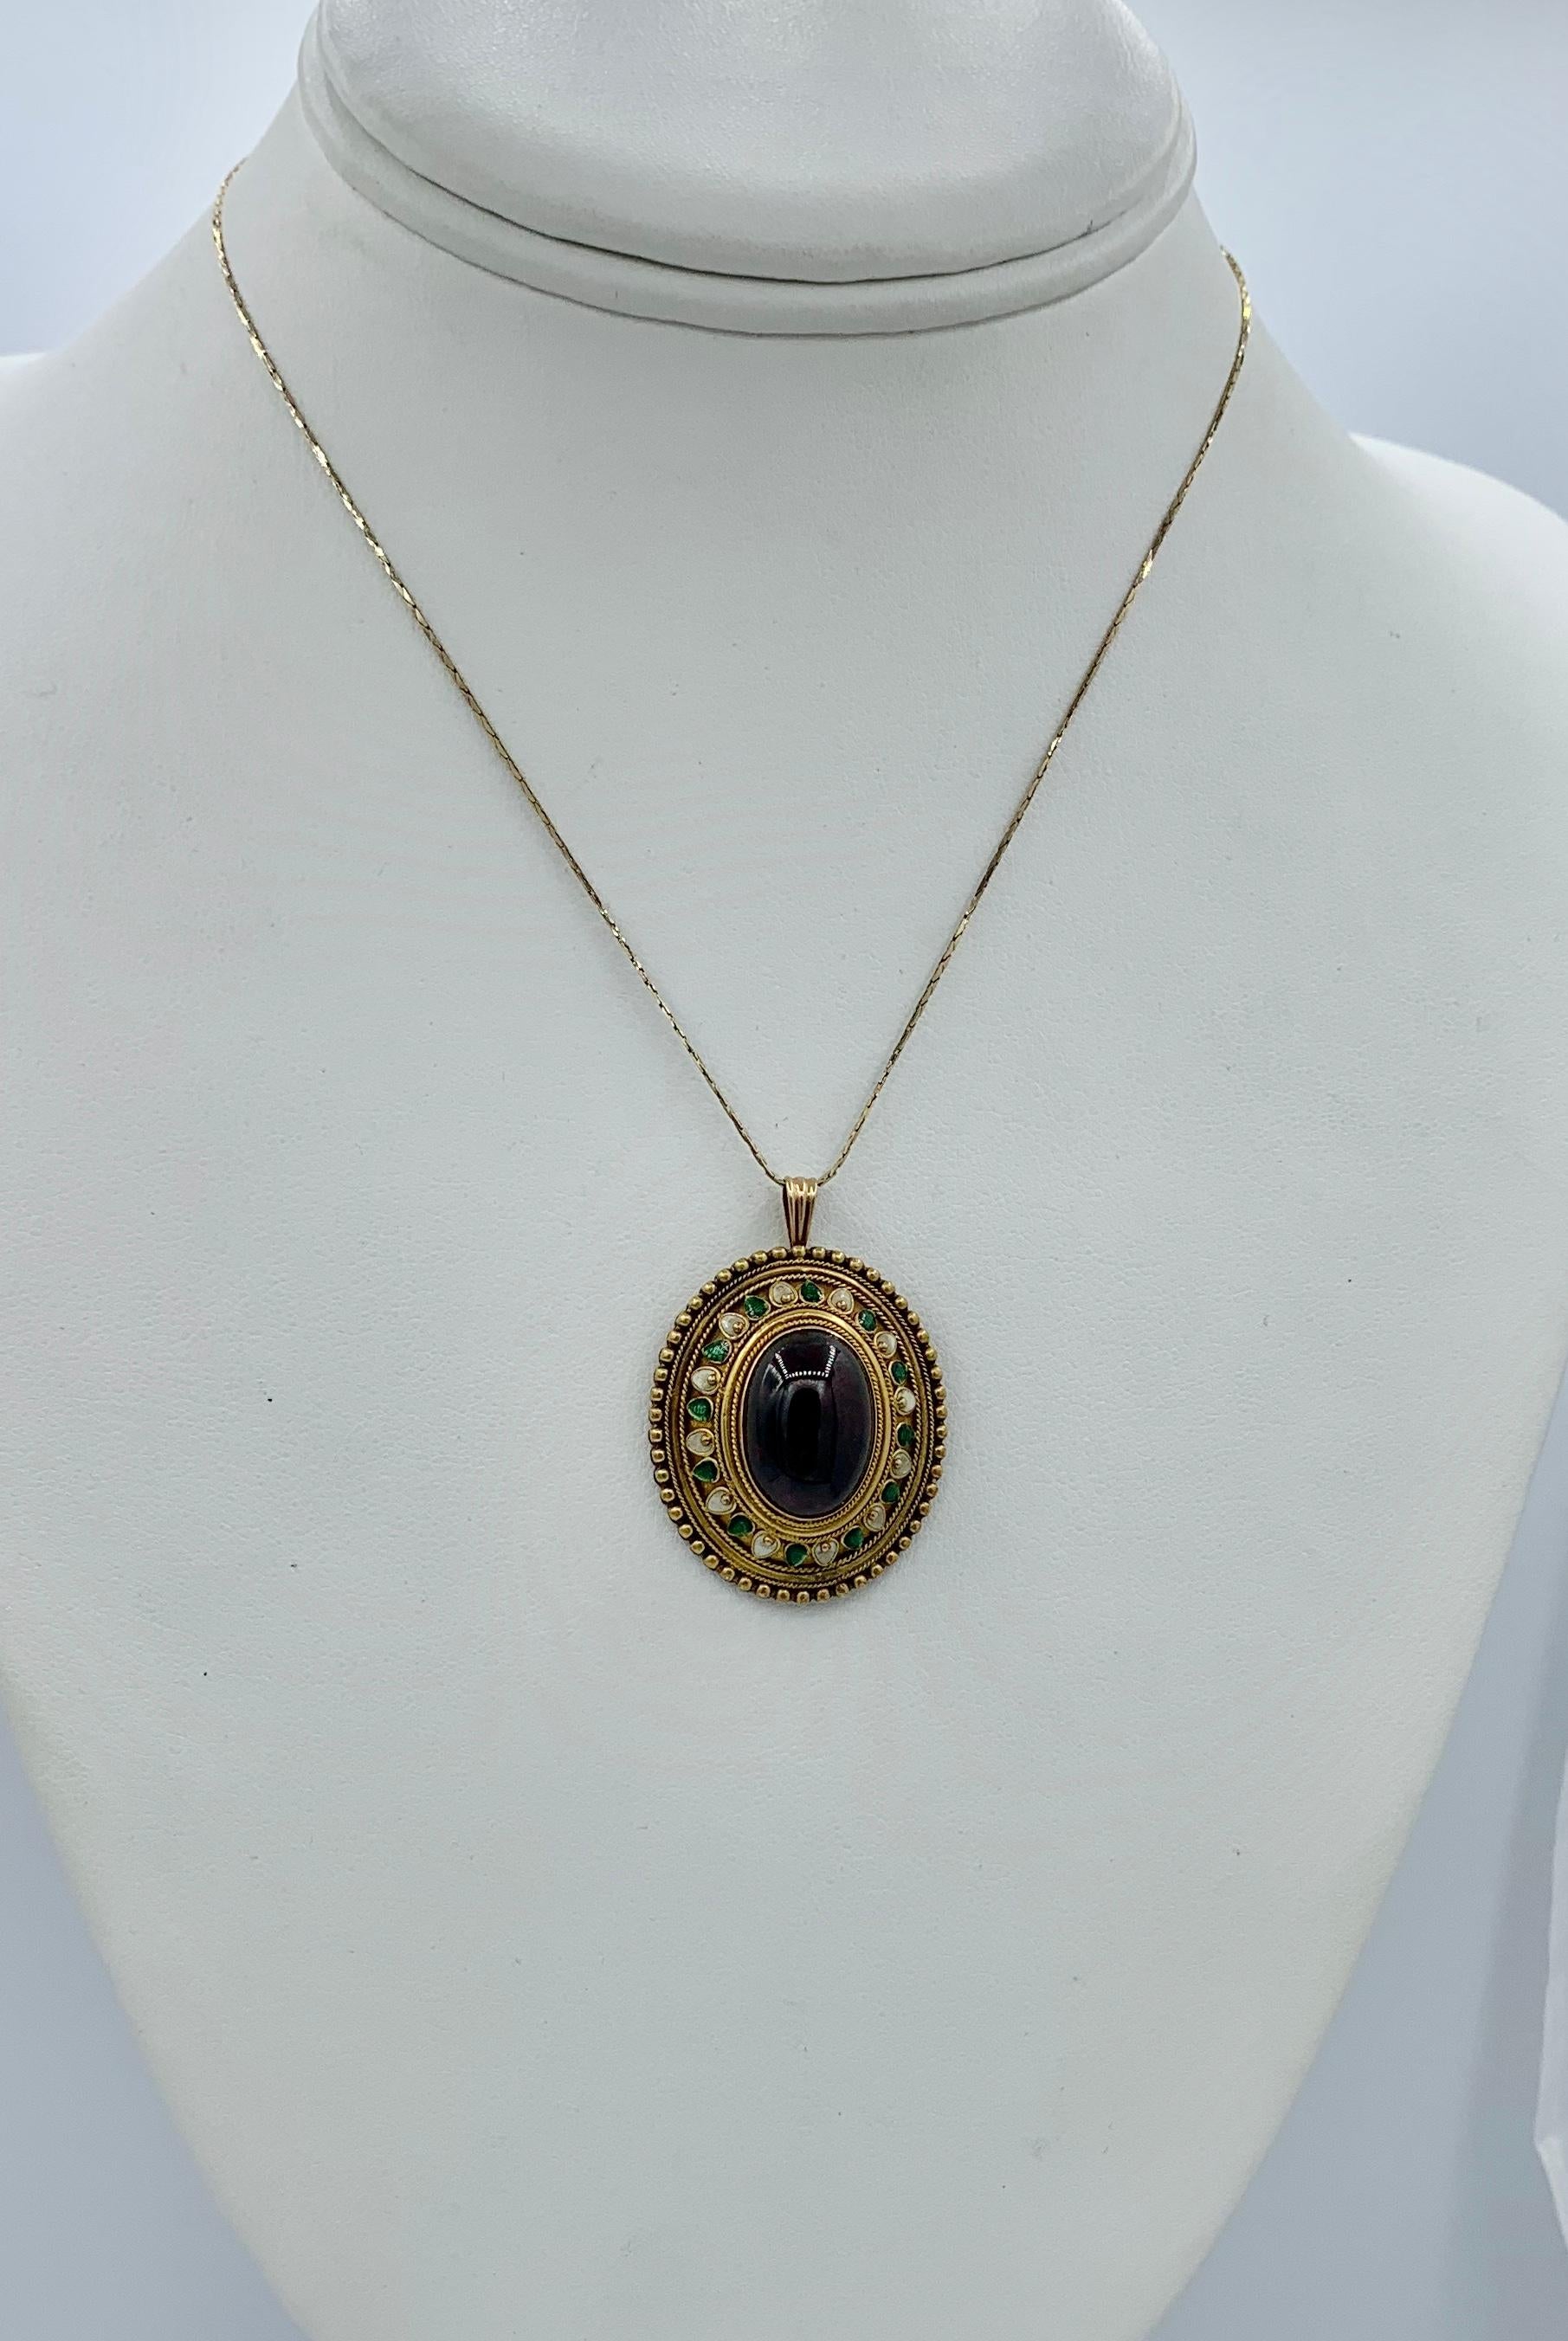 This is one of the most stunning antique 19th Century Garnet Enamel jewels we have seen.  The Etruscan Archeological Revival pendant features a magnificent blood red Bohemian Garnet cabochon of gorgeous color and size set in a 14 Karat Gold Enamel